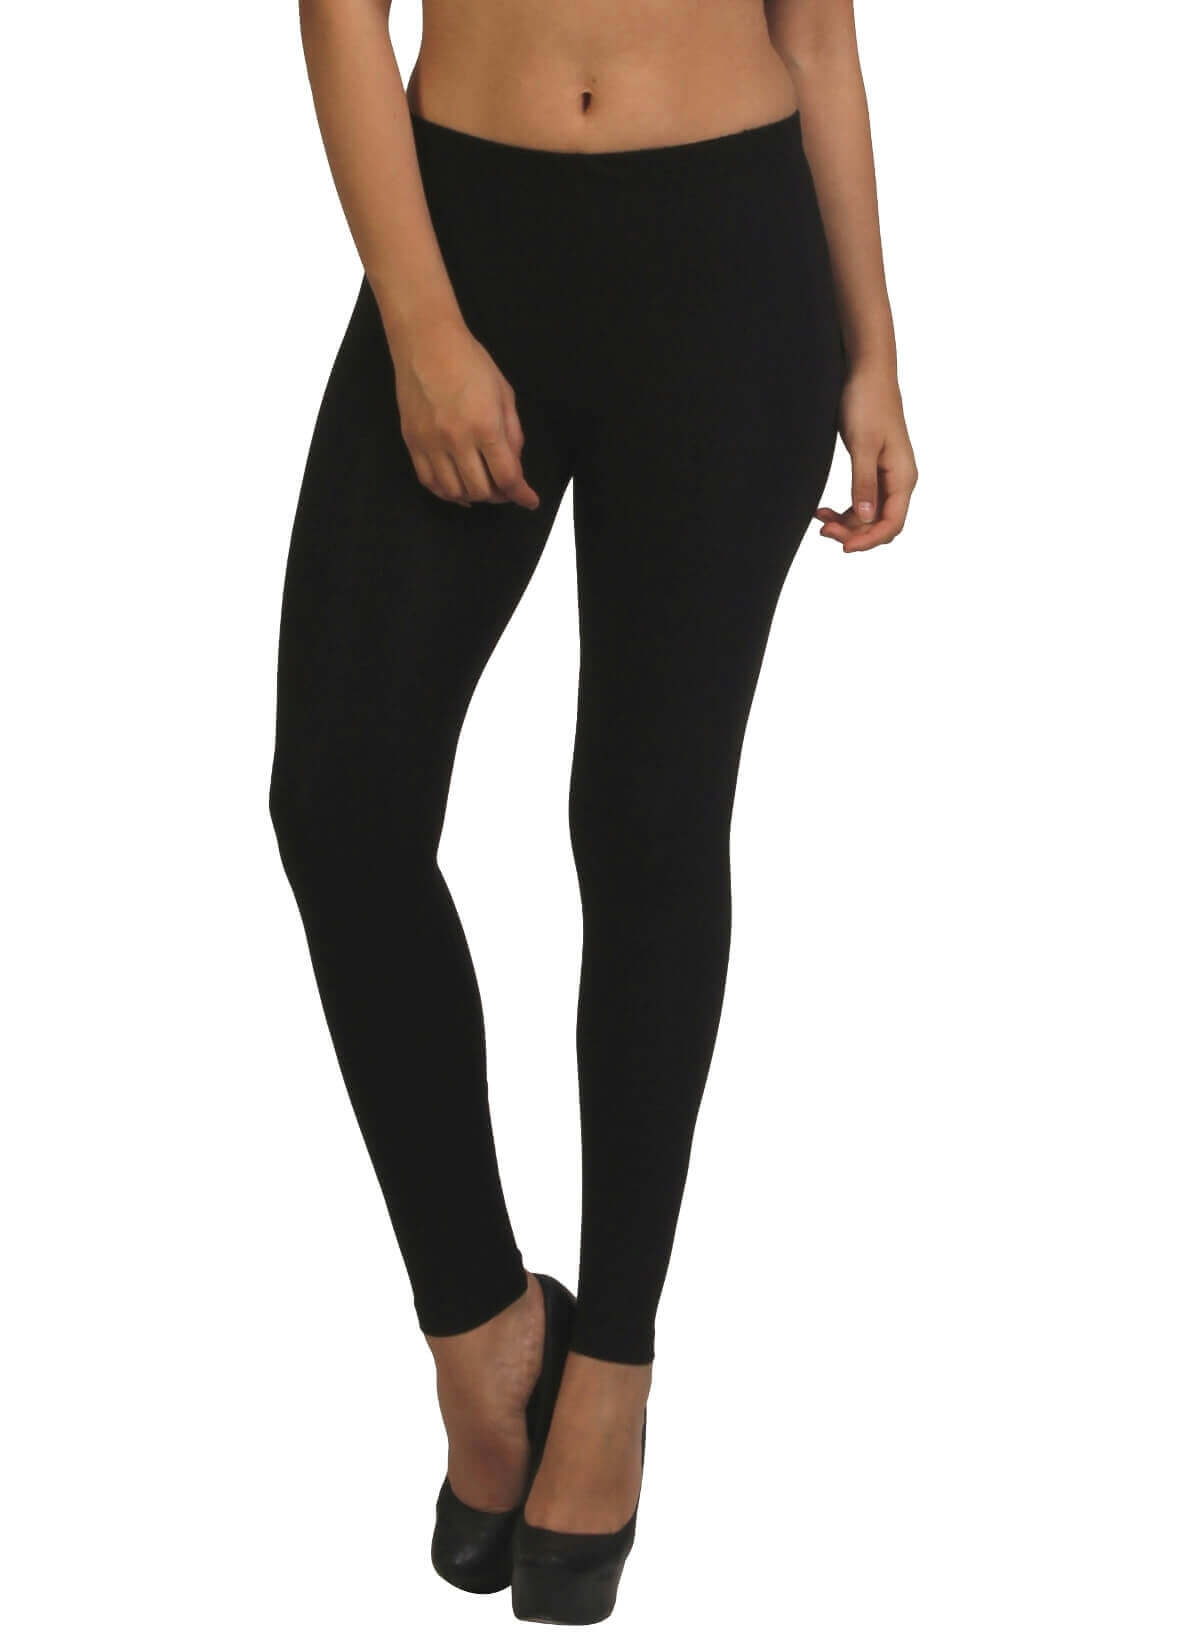 Buy Black Tights Online In India -  India